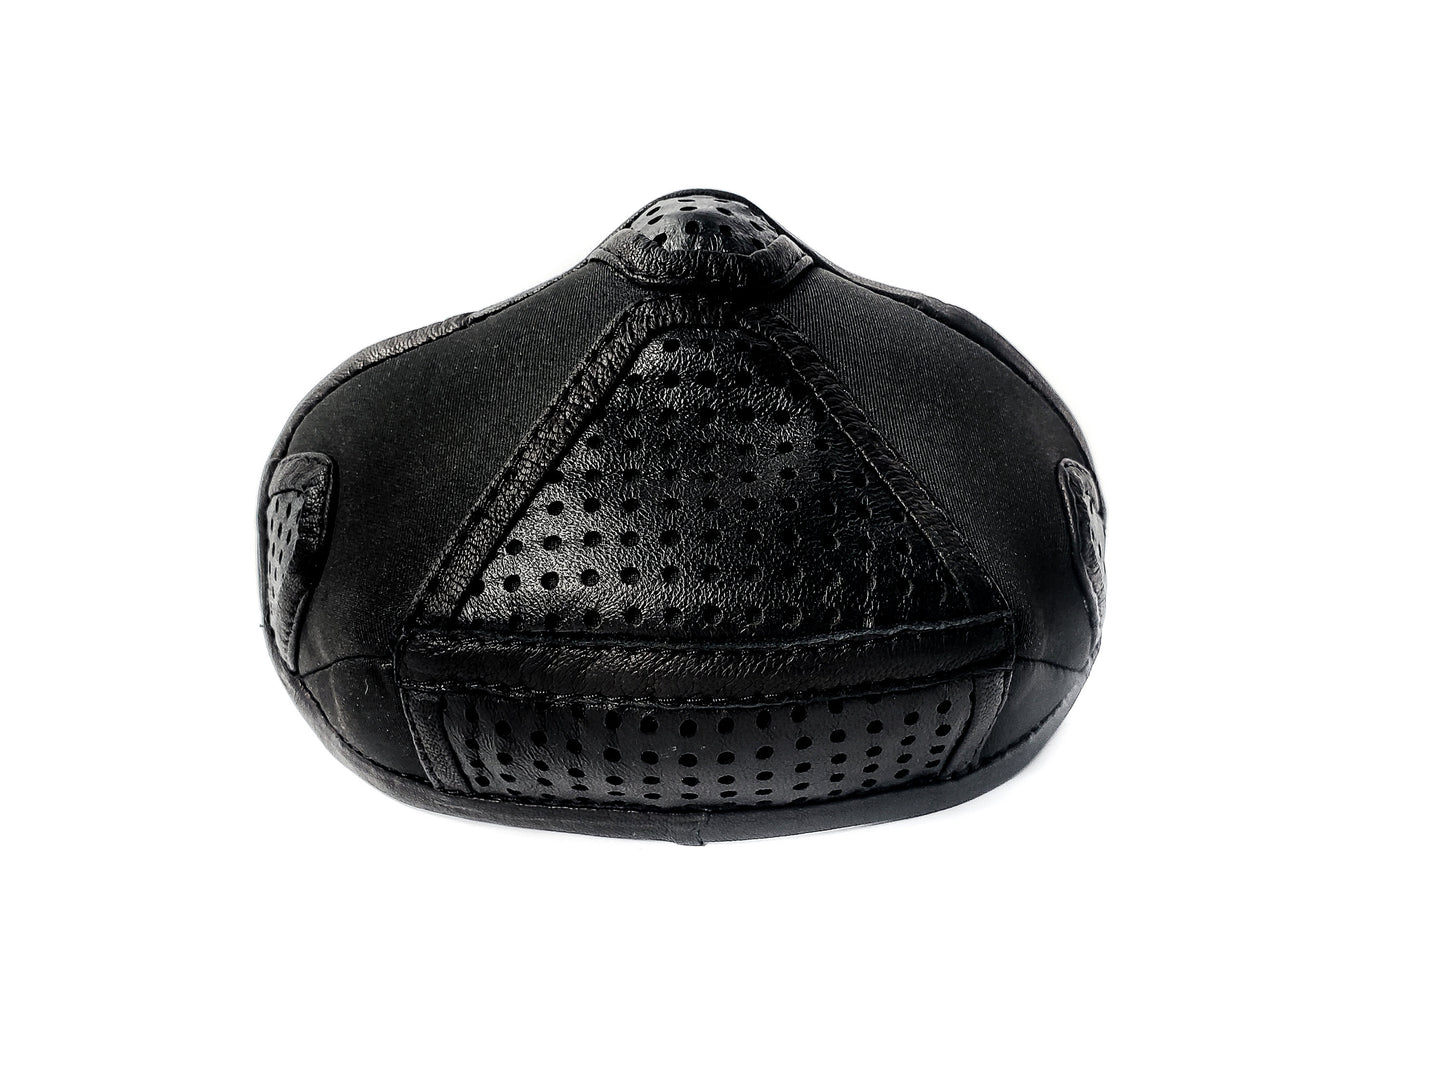 Neoprene and Leather Adjustable Adult Protective Face Mask